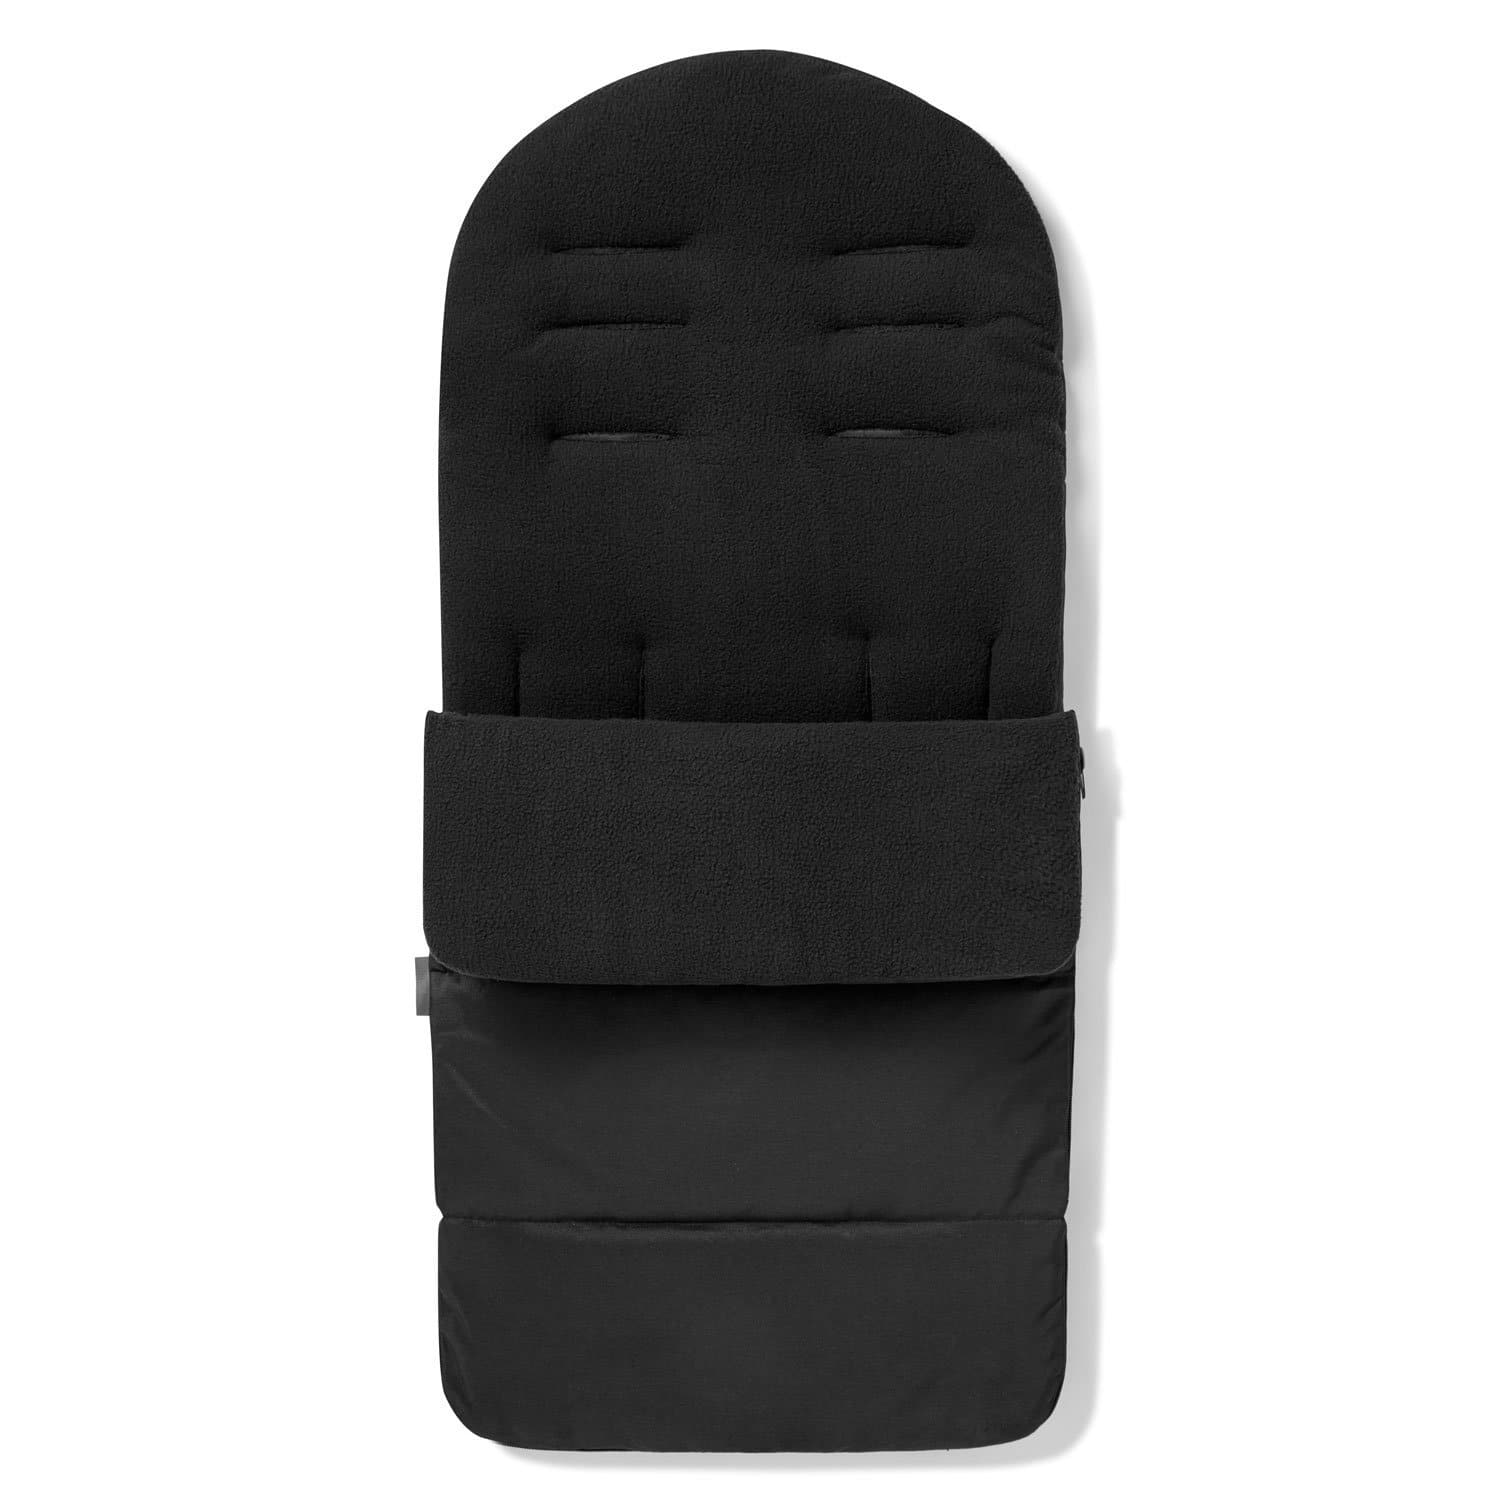 Premium Footmuff / Cosy Toes Compatible with iCandy - Black Jack / Fits All Models | For Your Little One